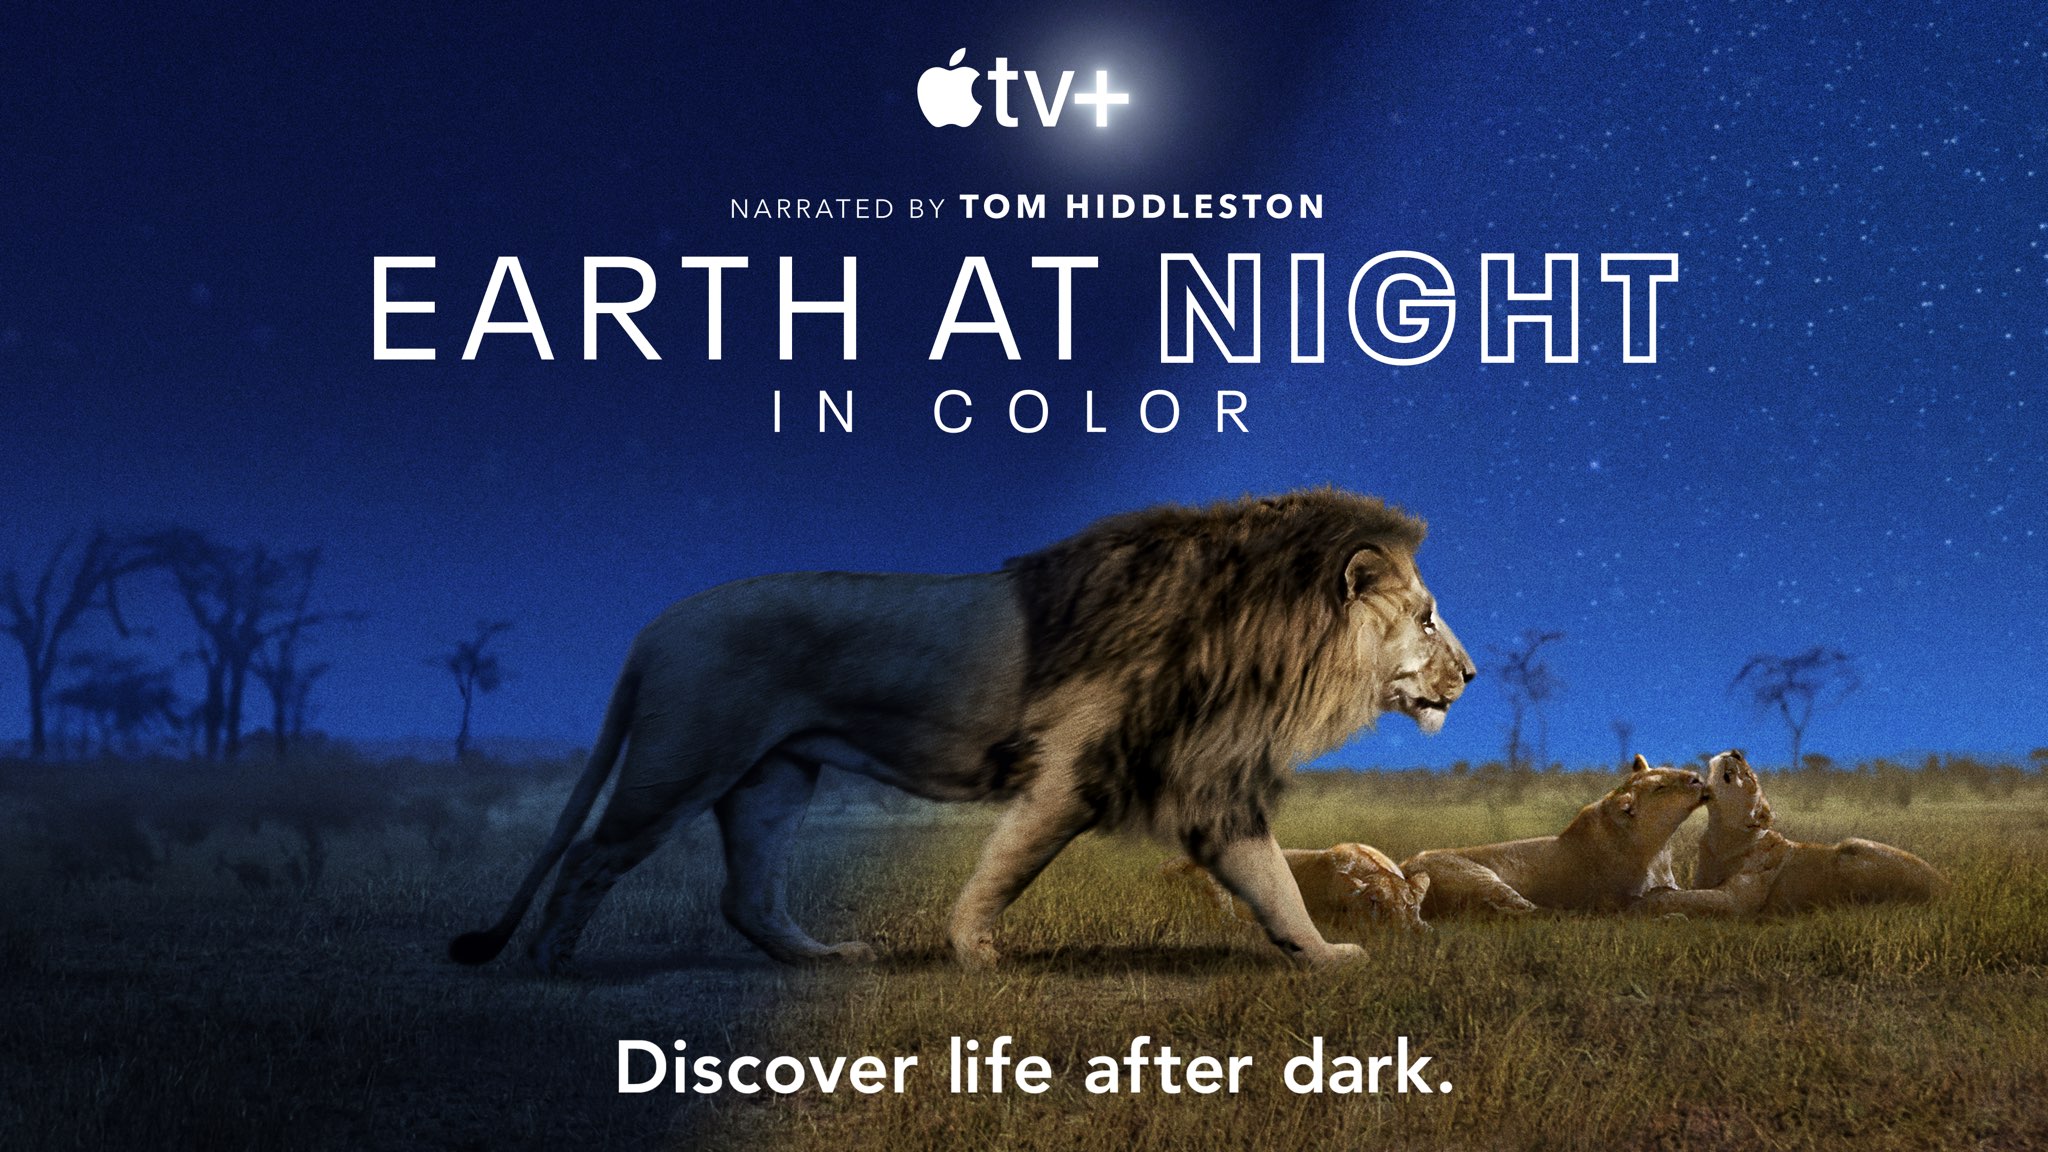 Groundbreaking docuseries “Earth at Night in Color” about nocturnal animals  hits Apple TV+